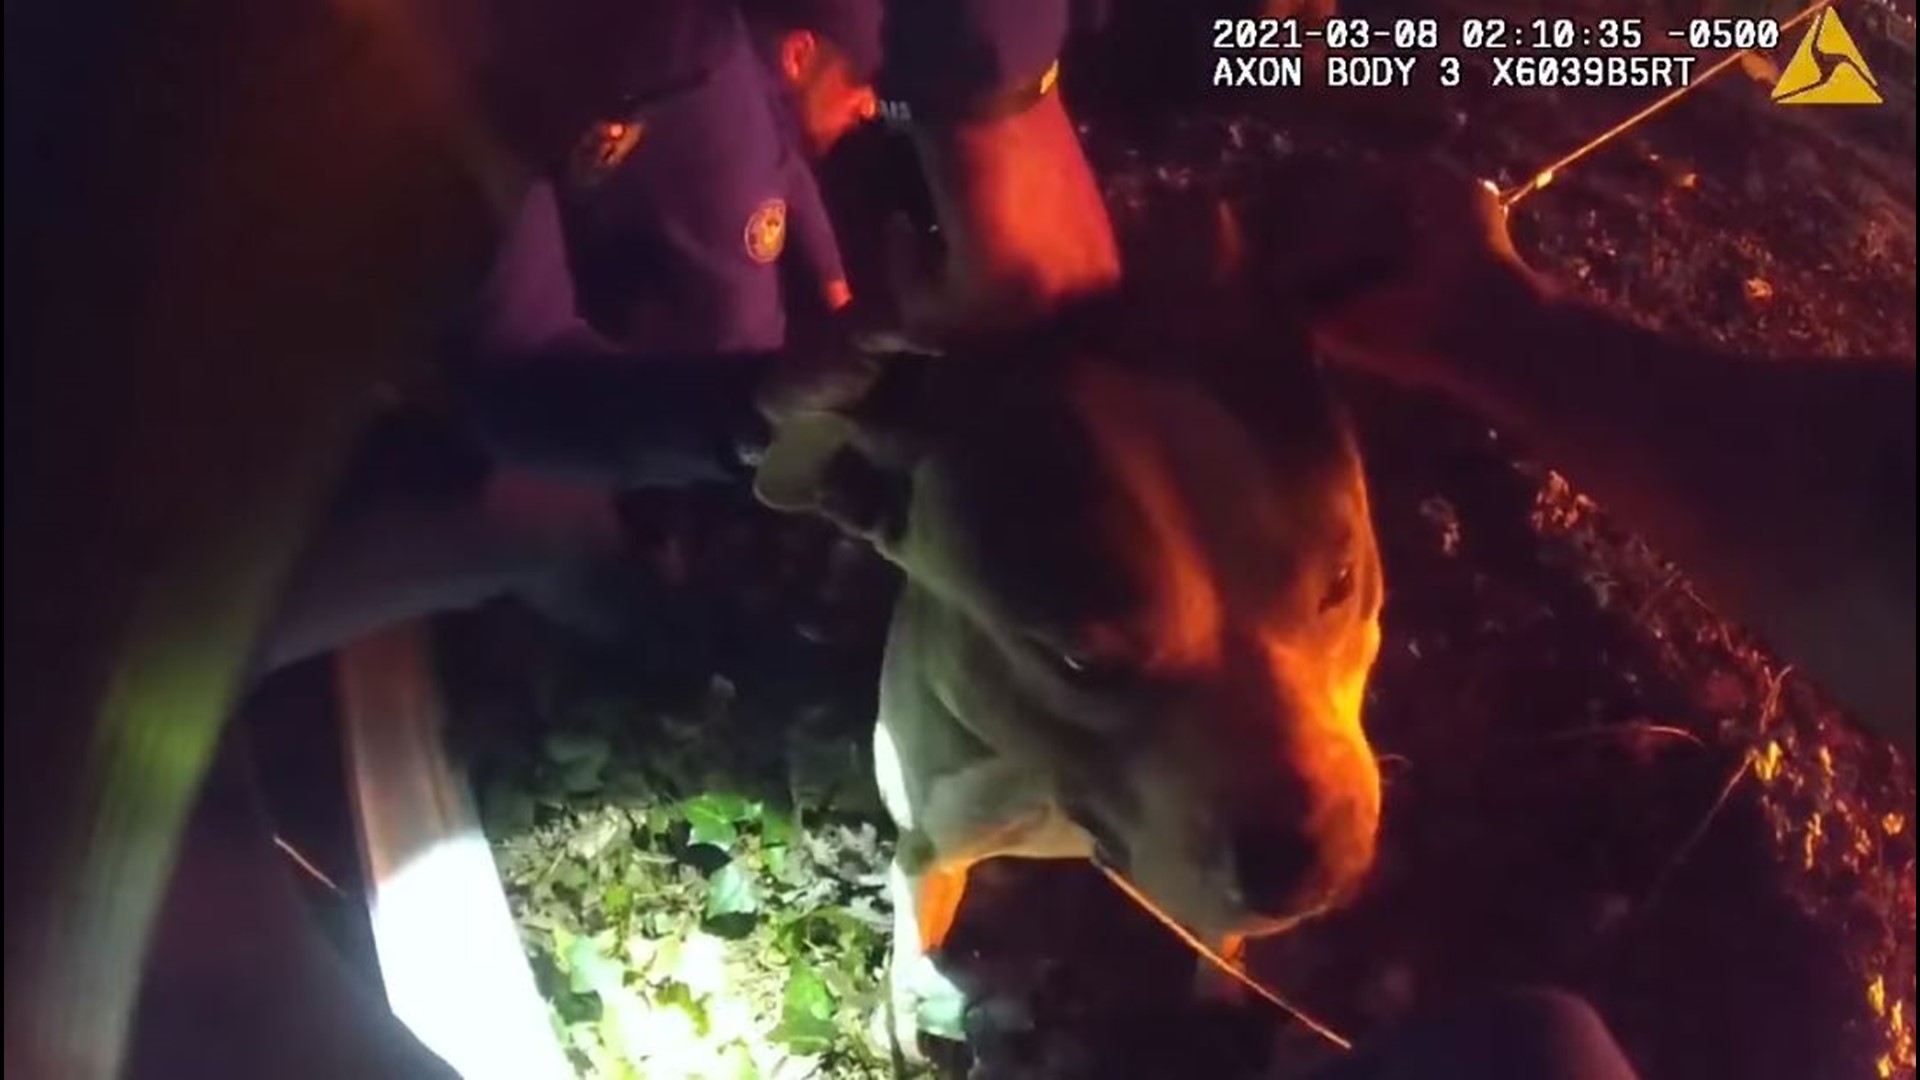 Officers were made aware of a dog tethered to a tree near the vehicle, which was fully engulfed, according to APD. Body cam footage shows the rescue in action.